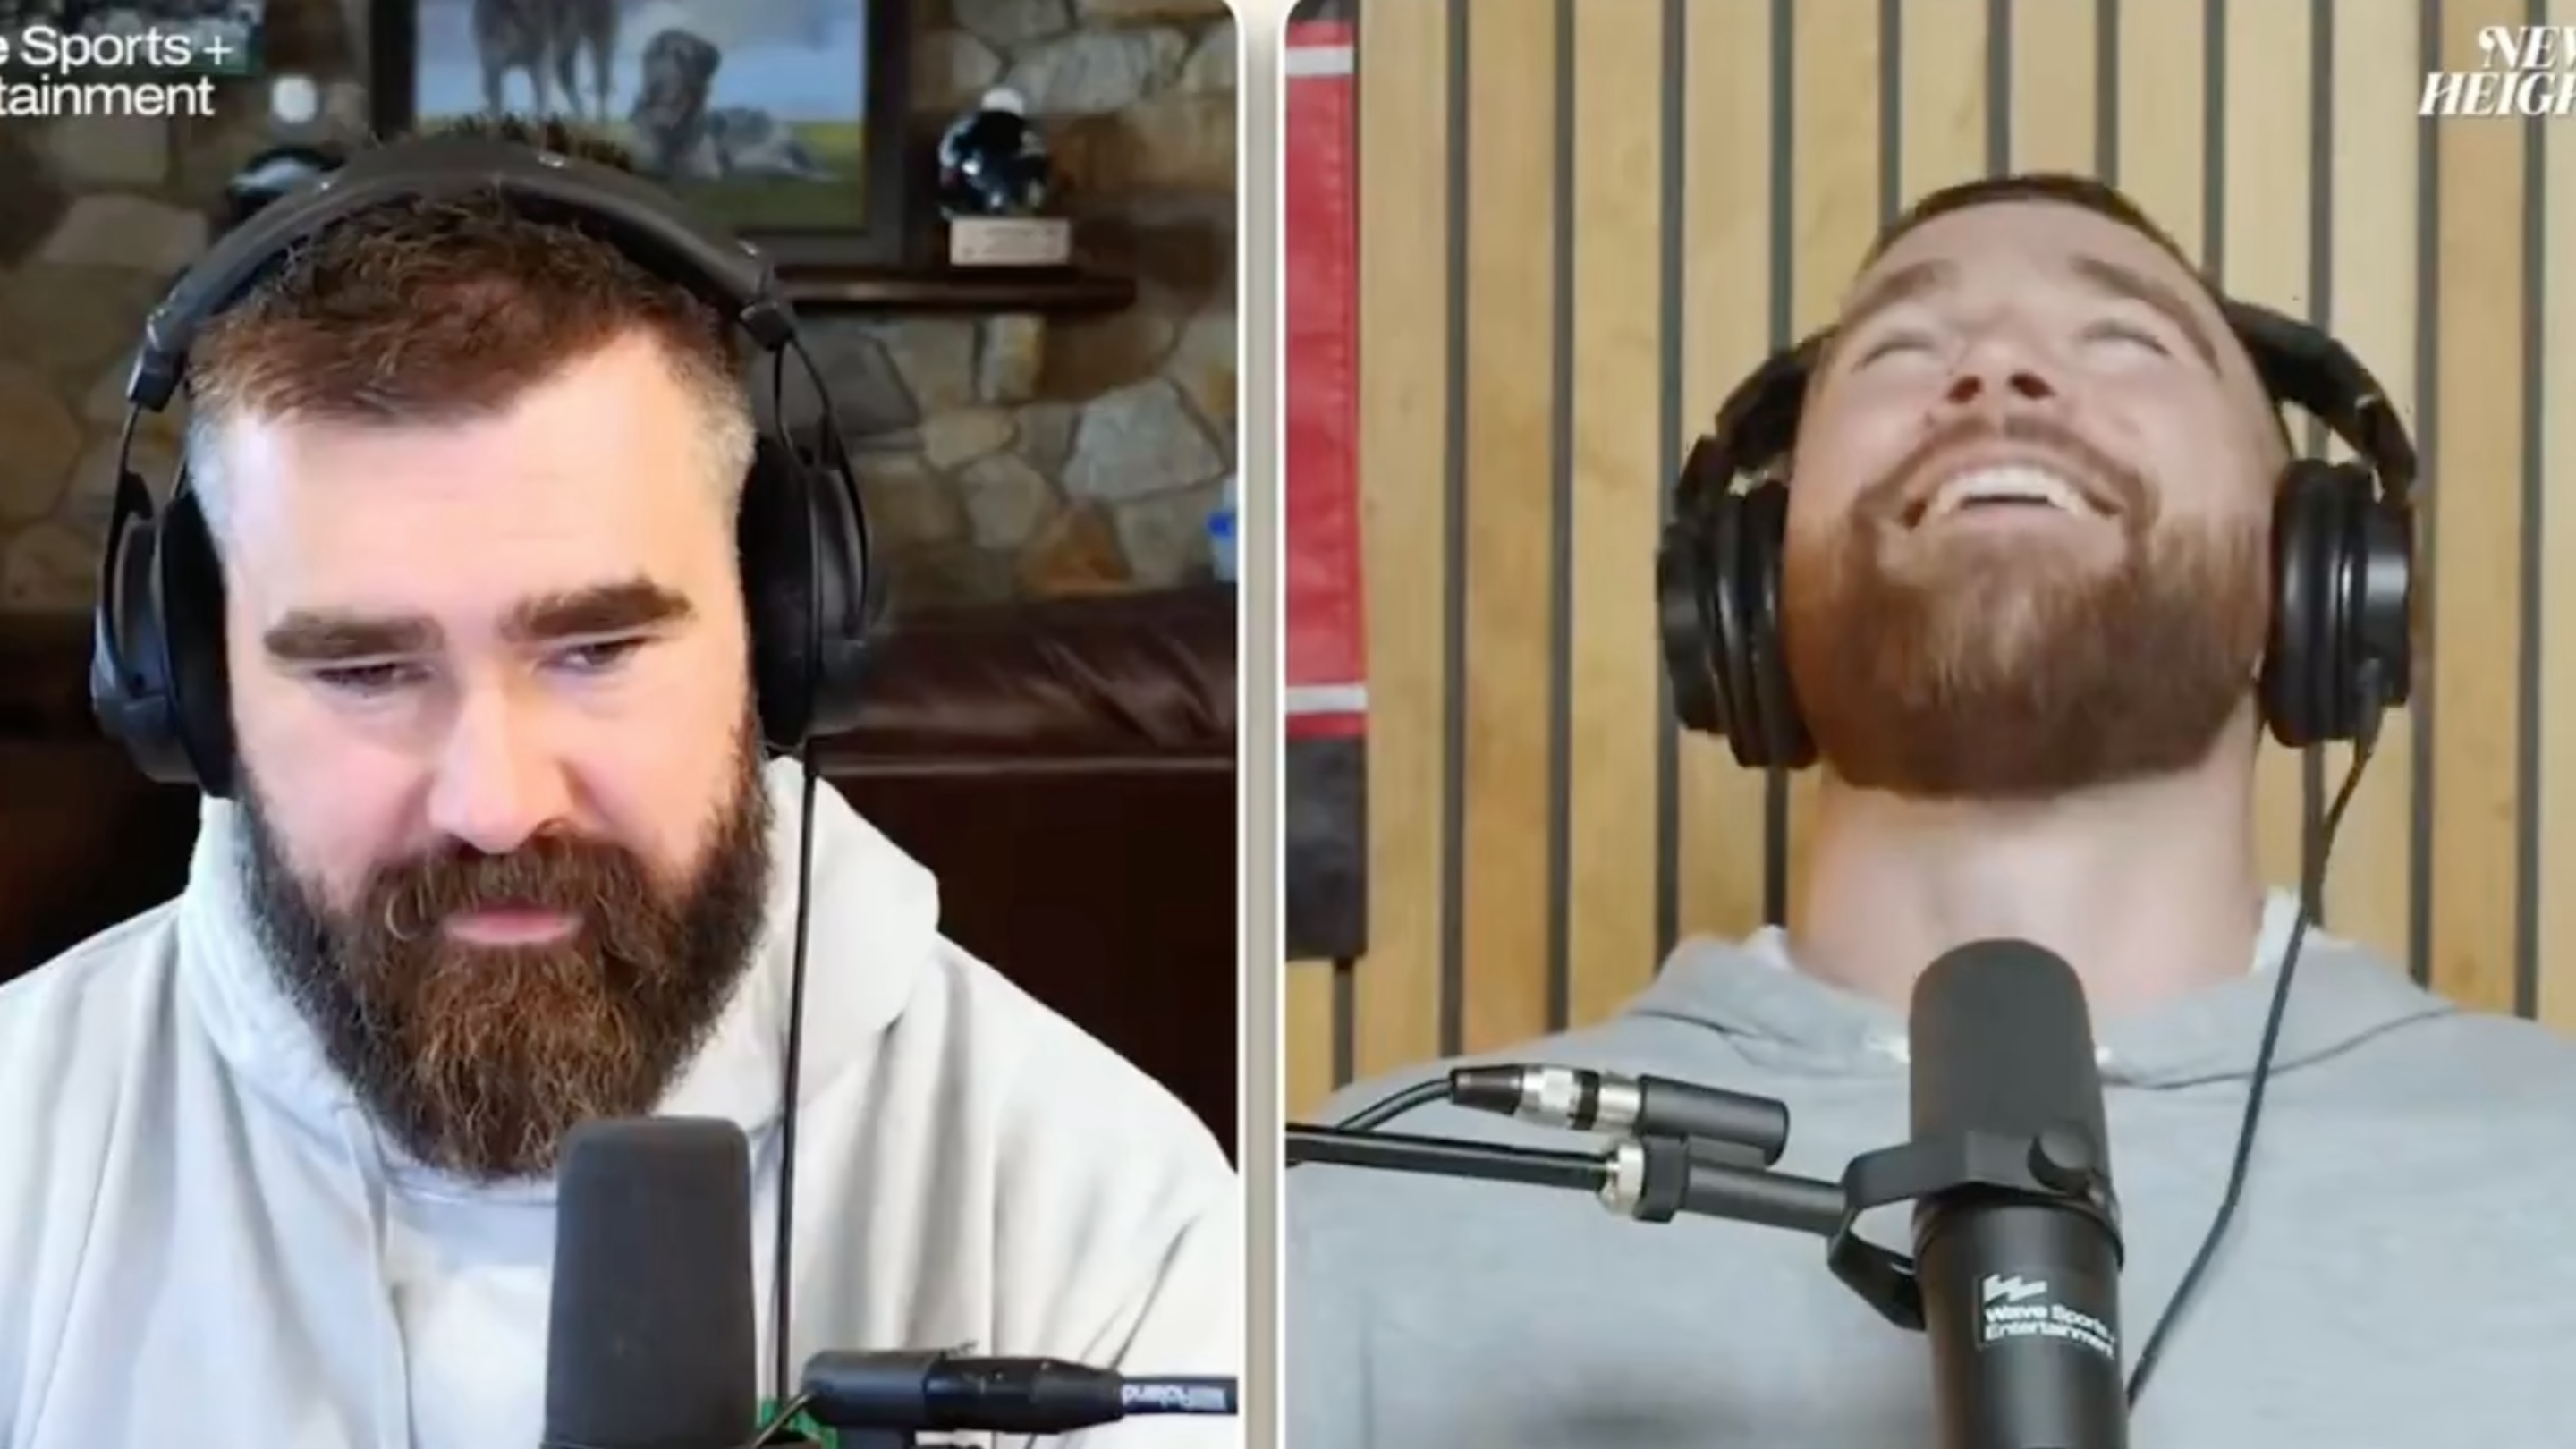 Chelsea From 'Love Is Blind' Responded to Travis Kelce's Impression of
Her